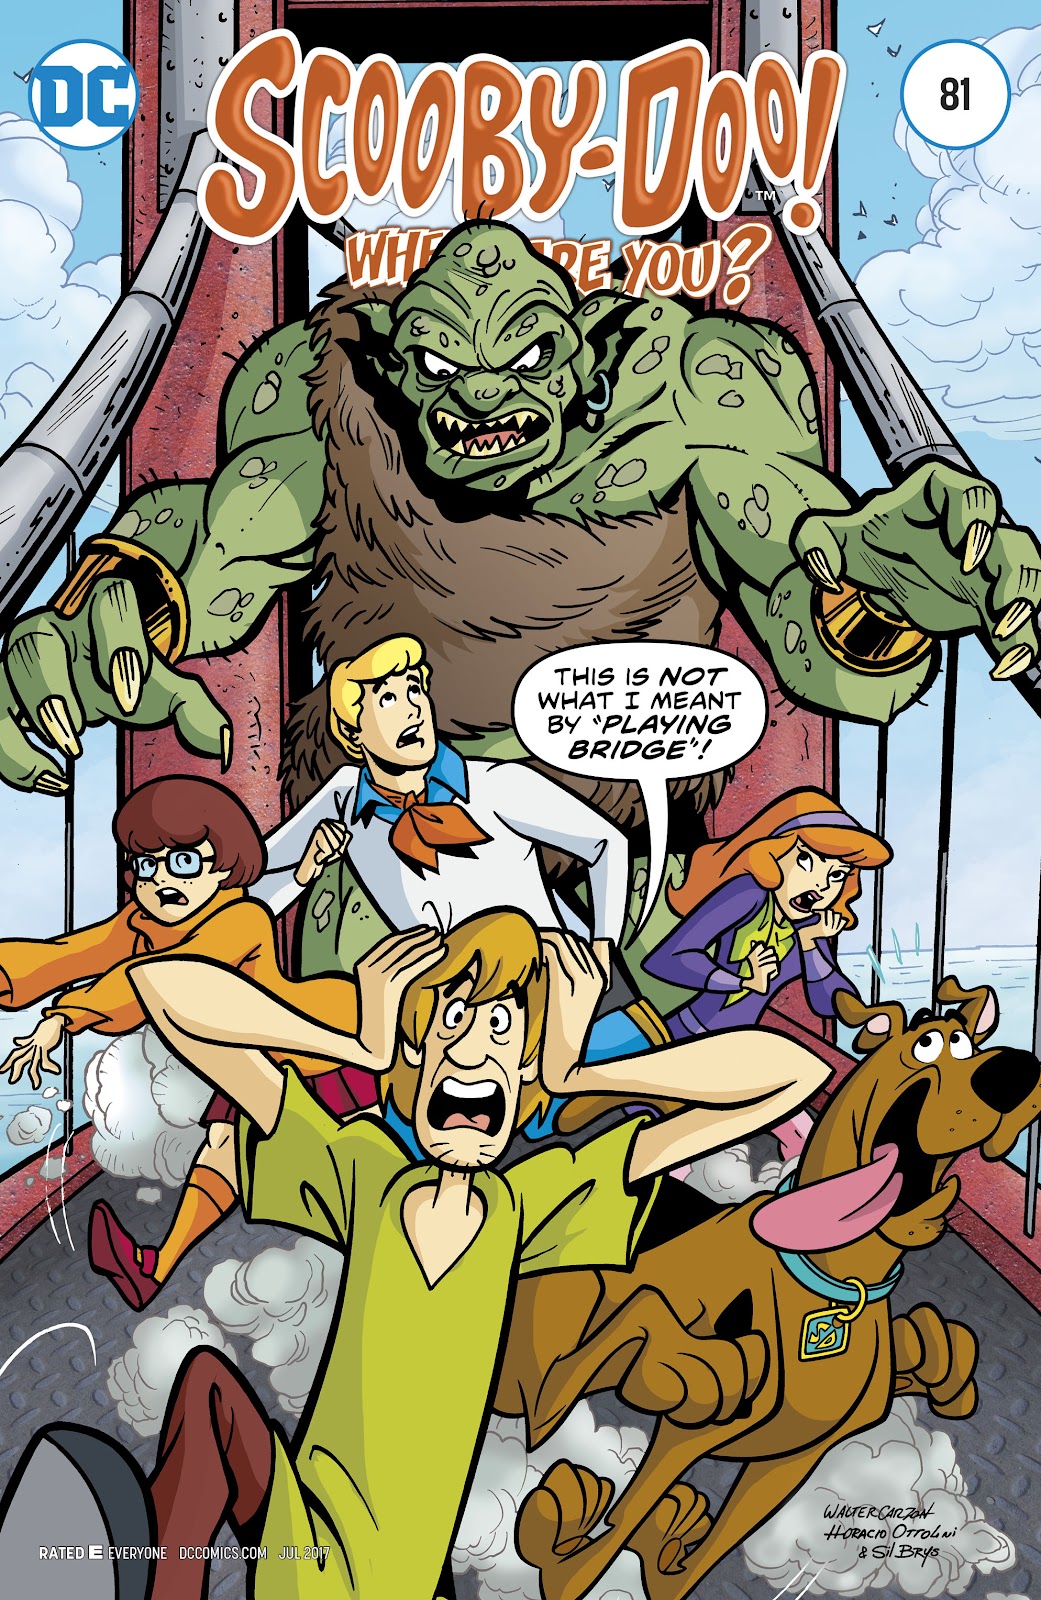 Scooby-Doo: Where Are You? issue 81 - Page 1